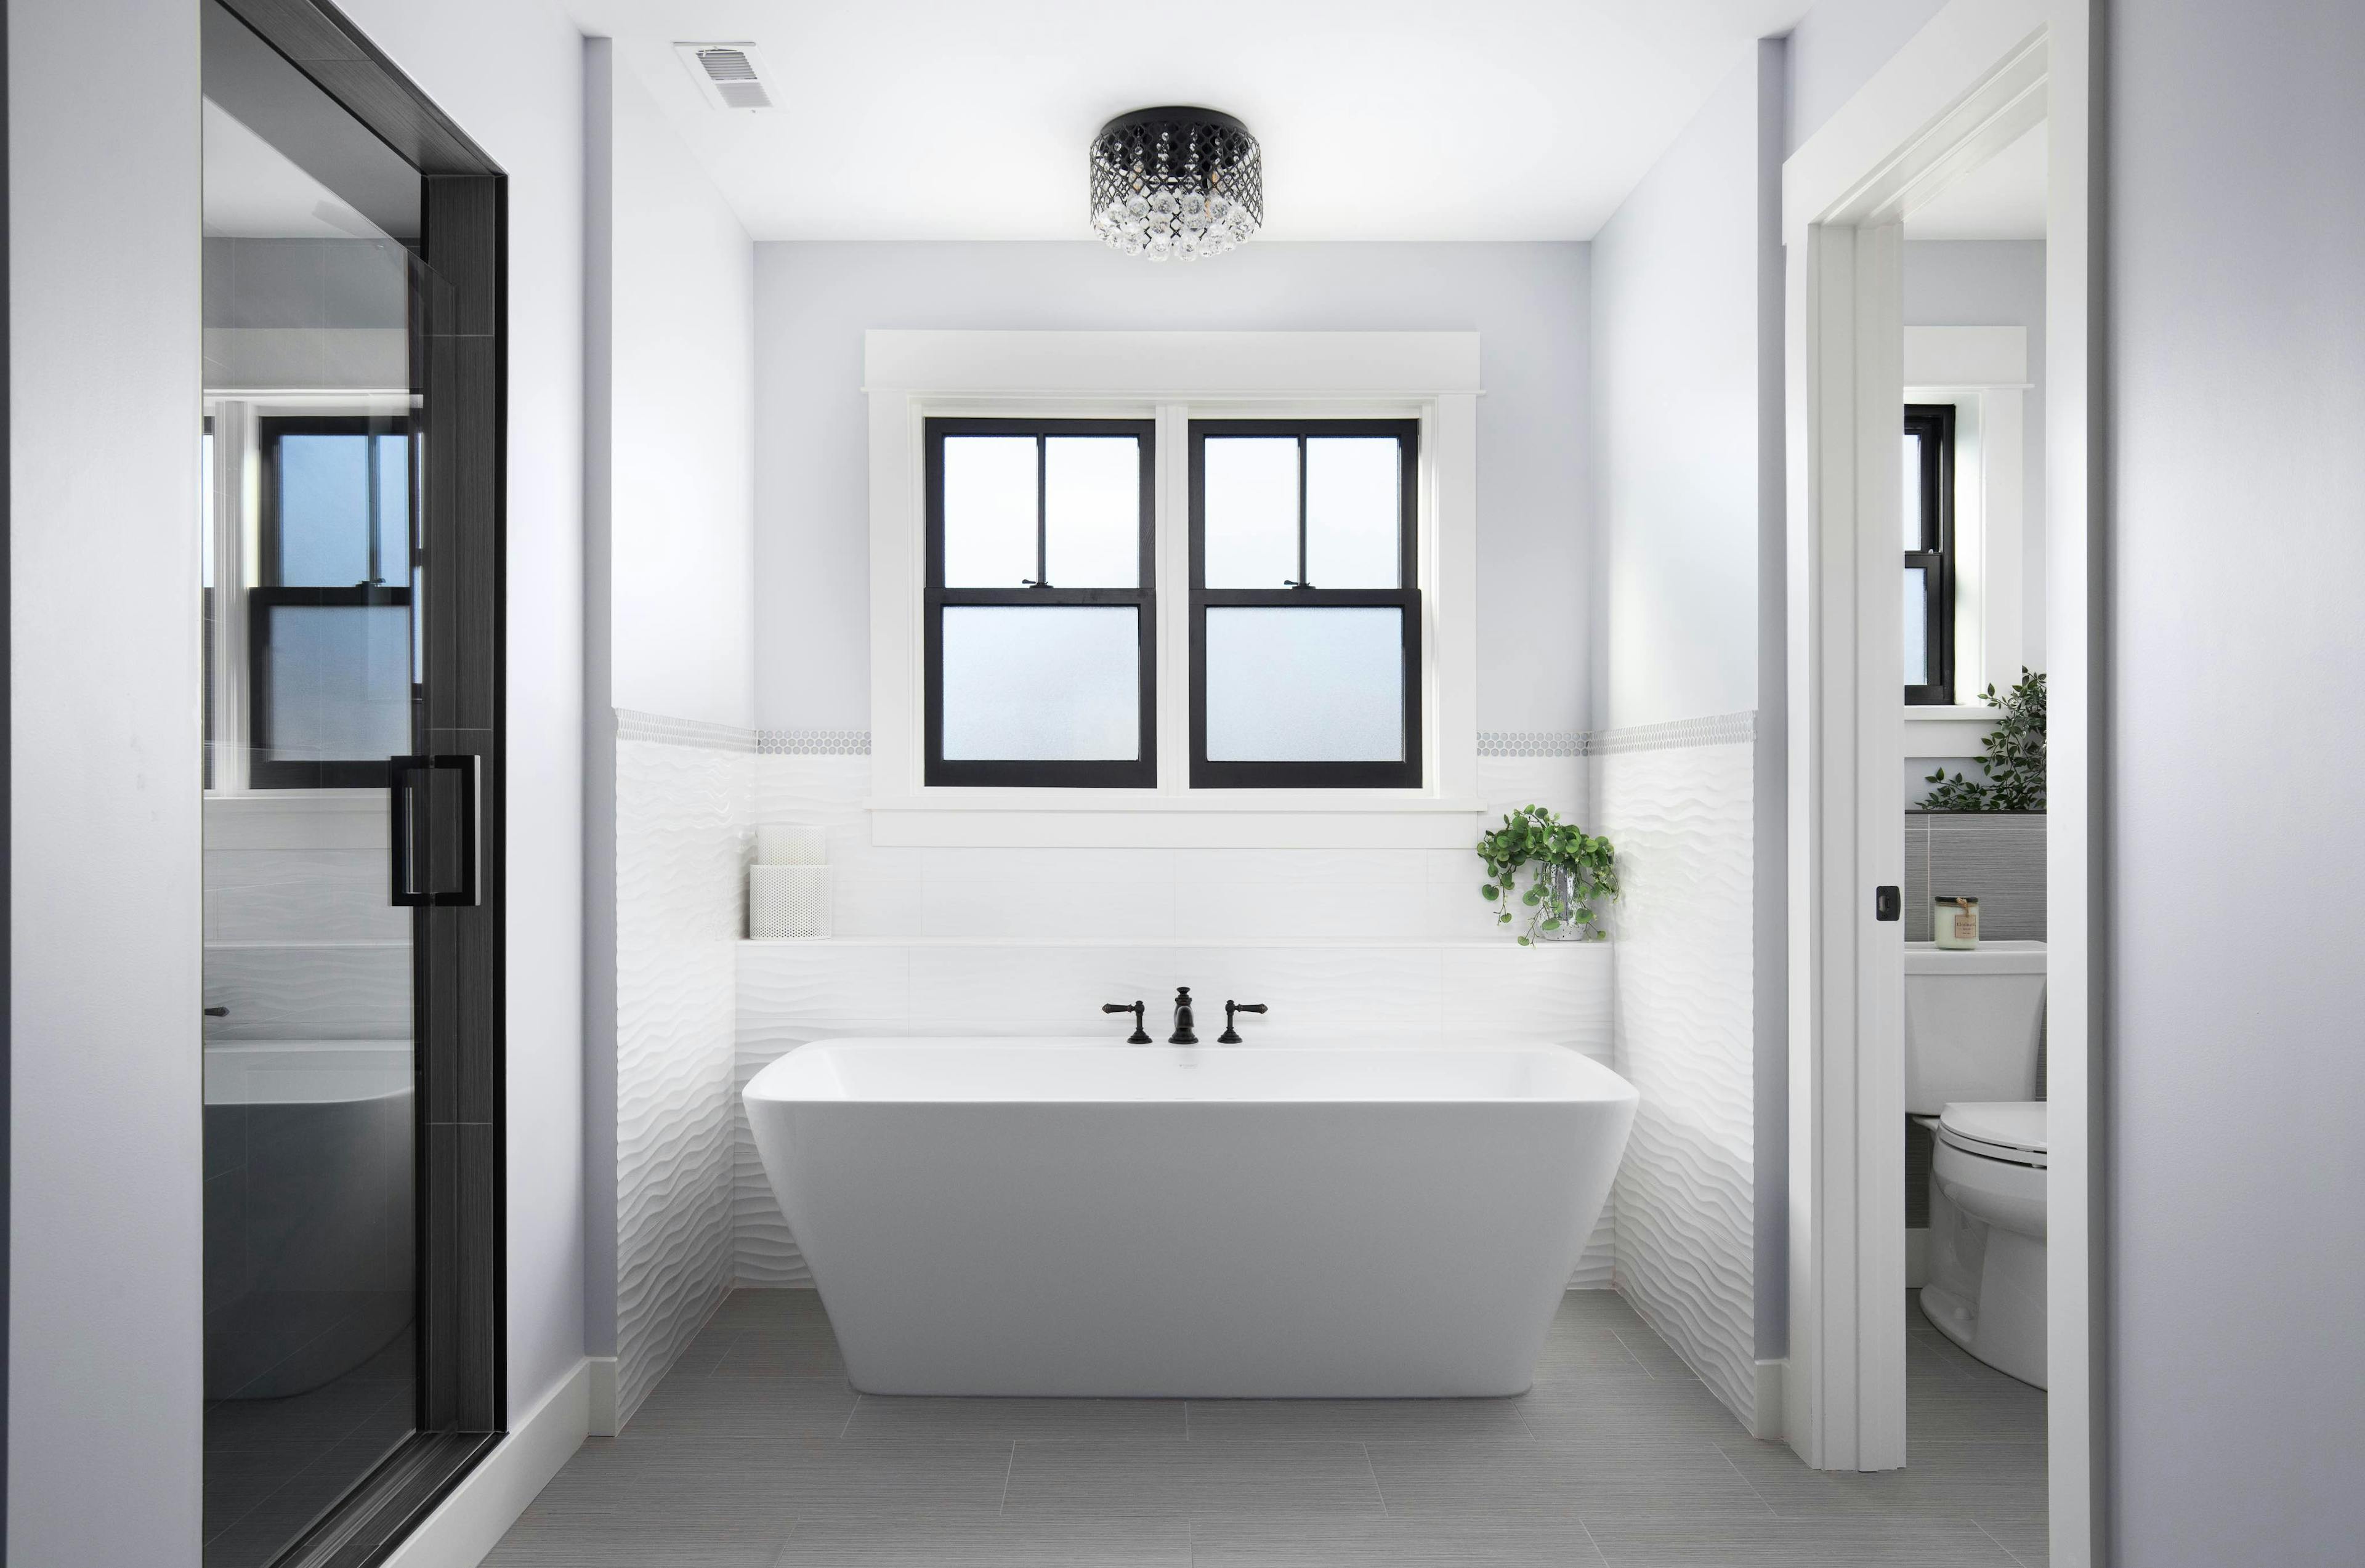 How much does it cost for bathroom renovations in Calgary?